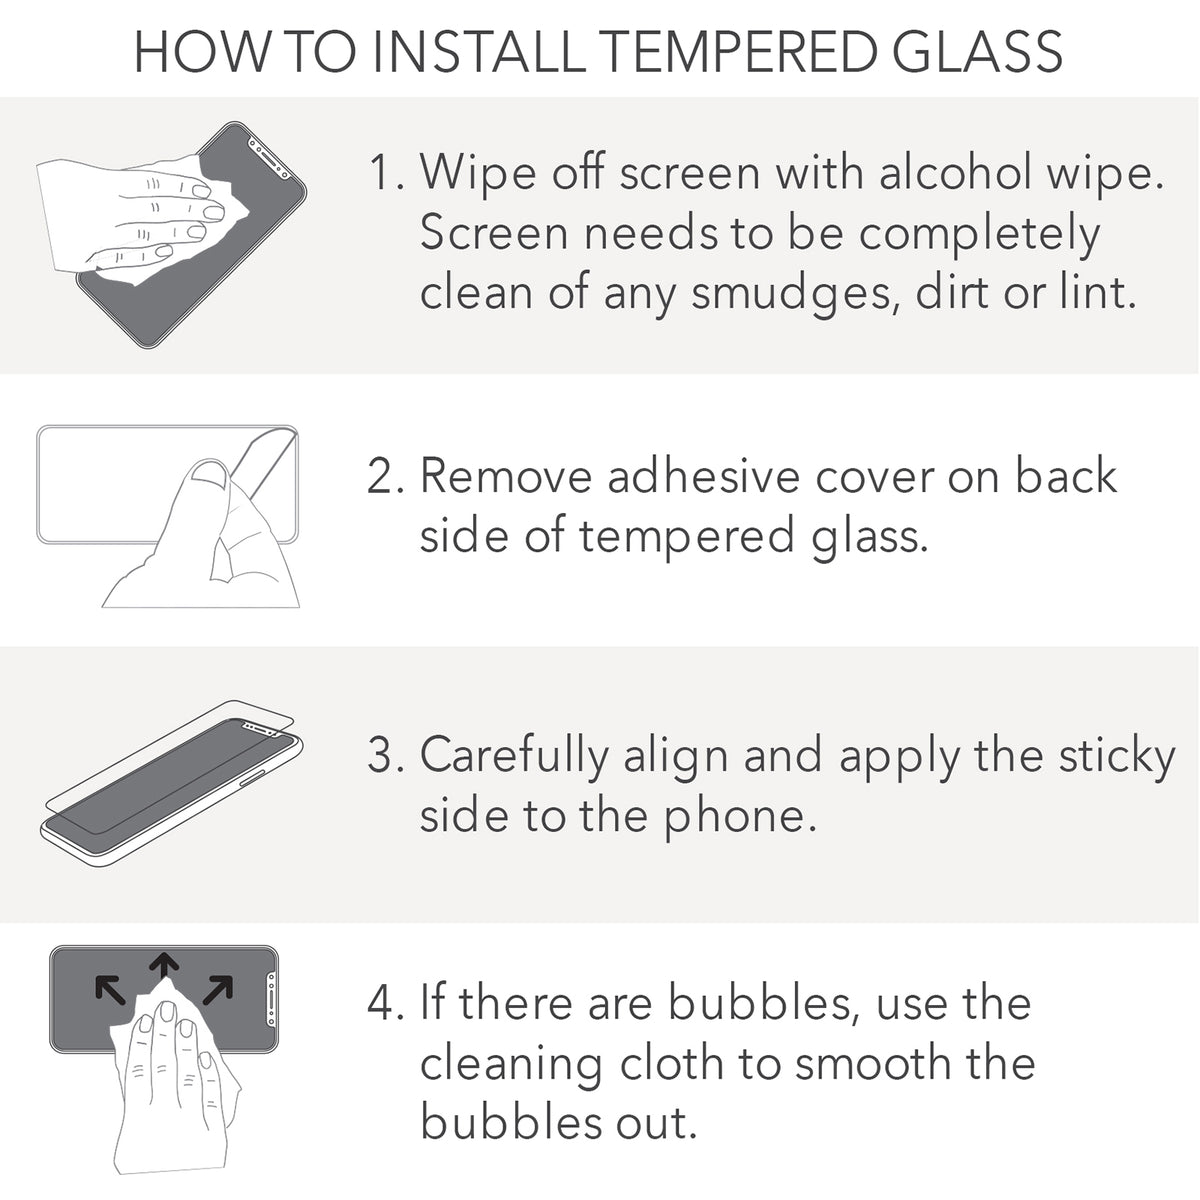 Cellairis Tempered Glass - Shell Shock  Apple iPhone 12 Pro Max Super Anti-Impact Screen Protectors